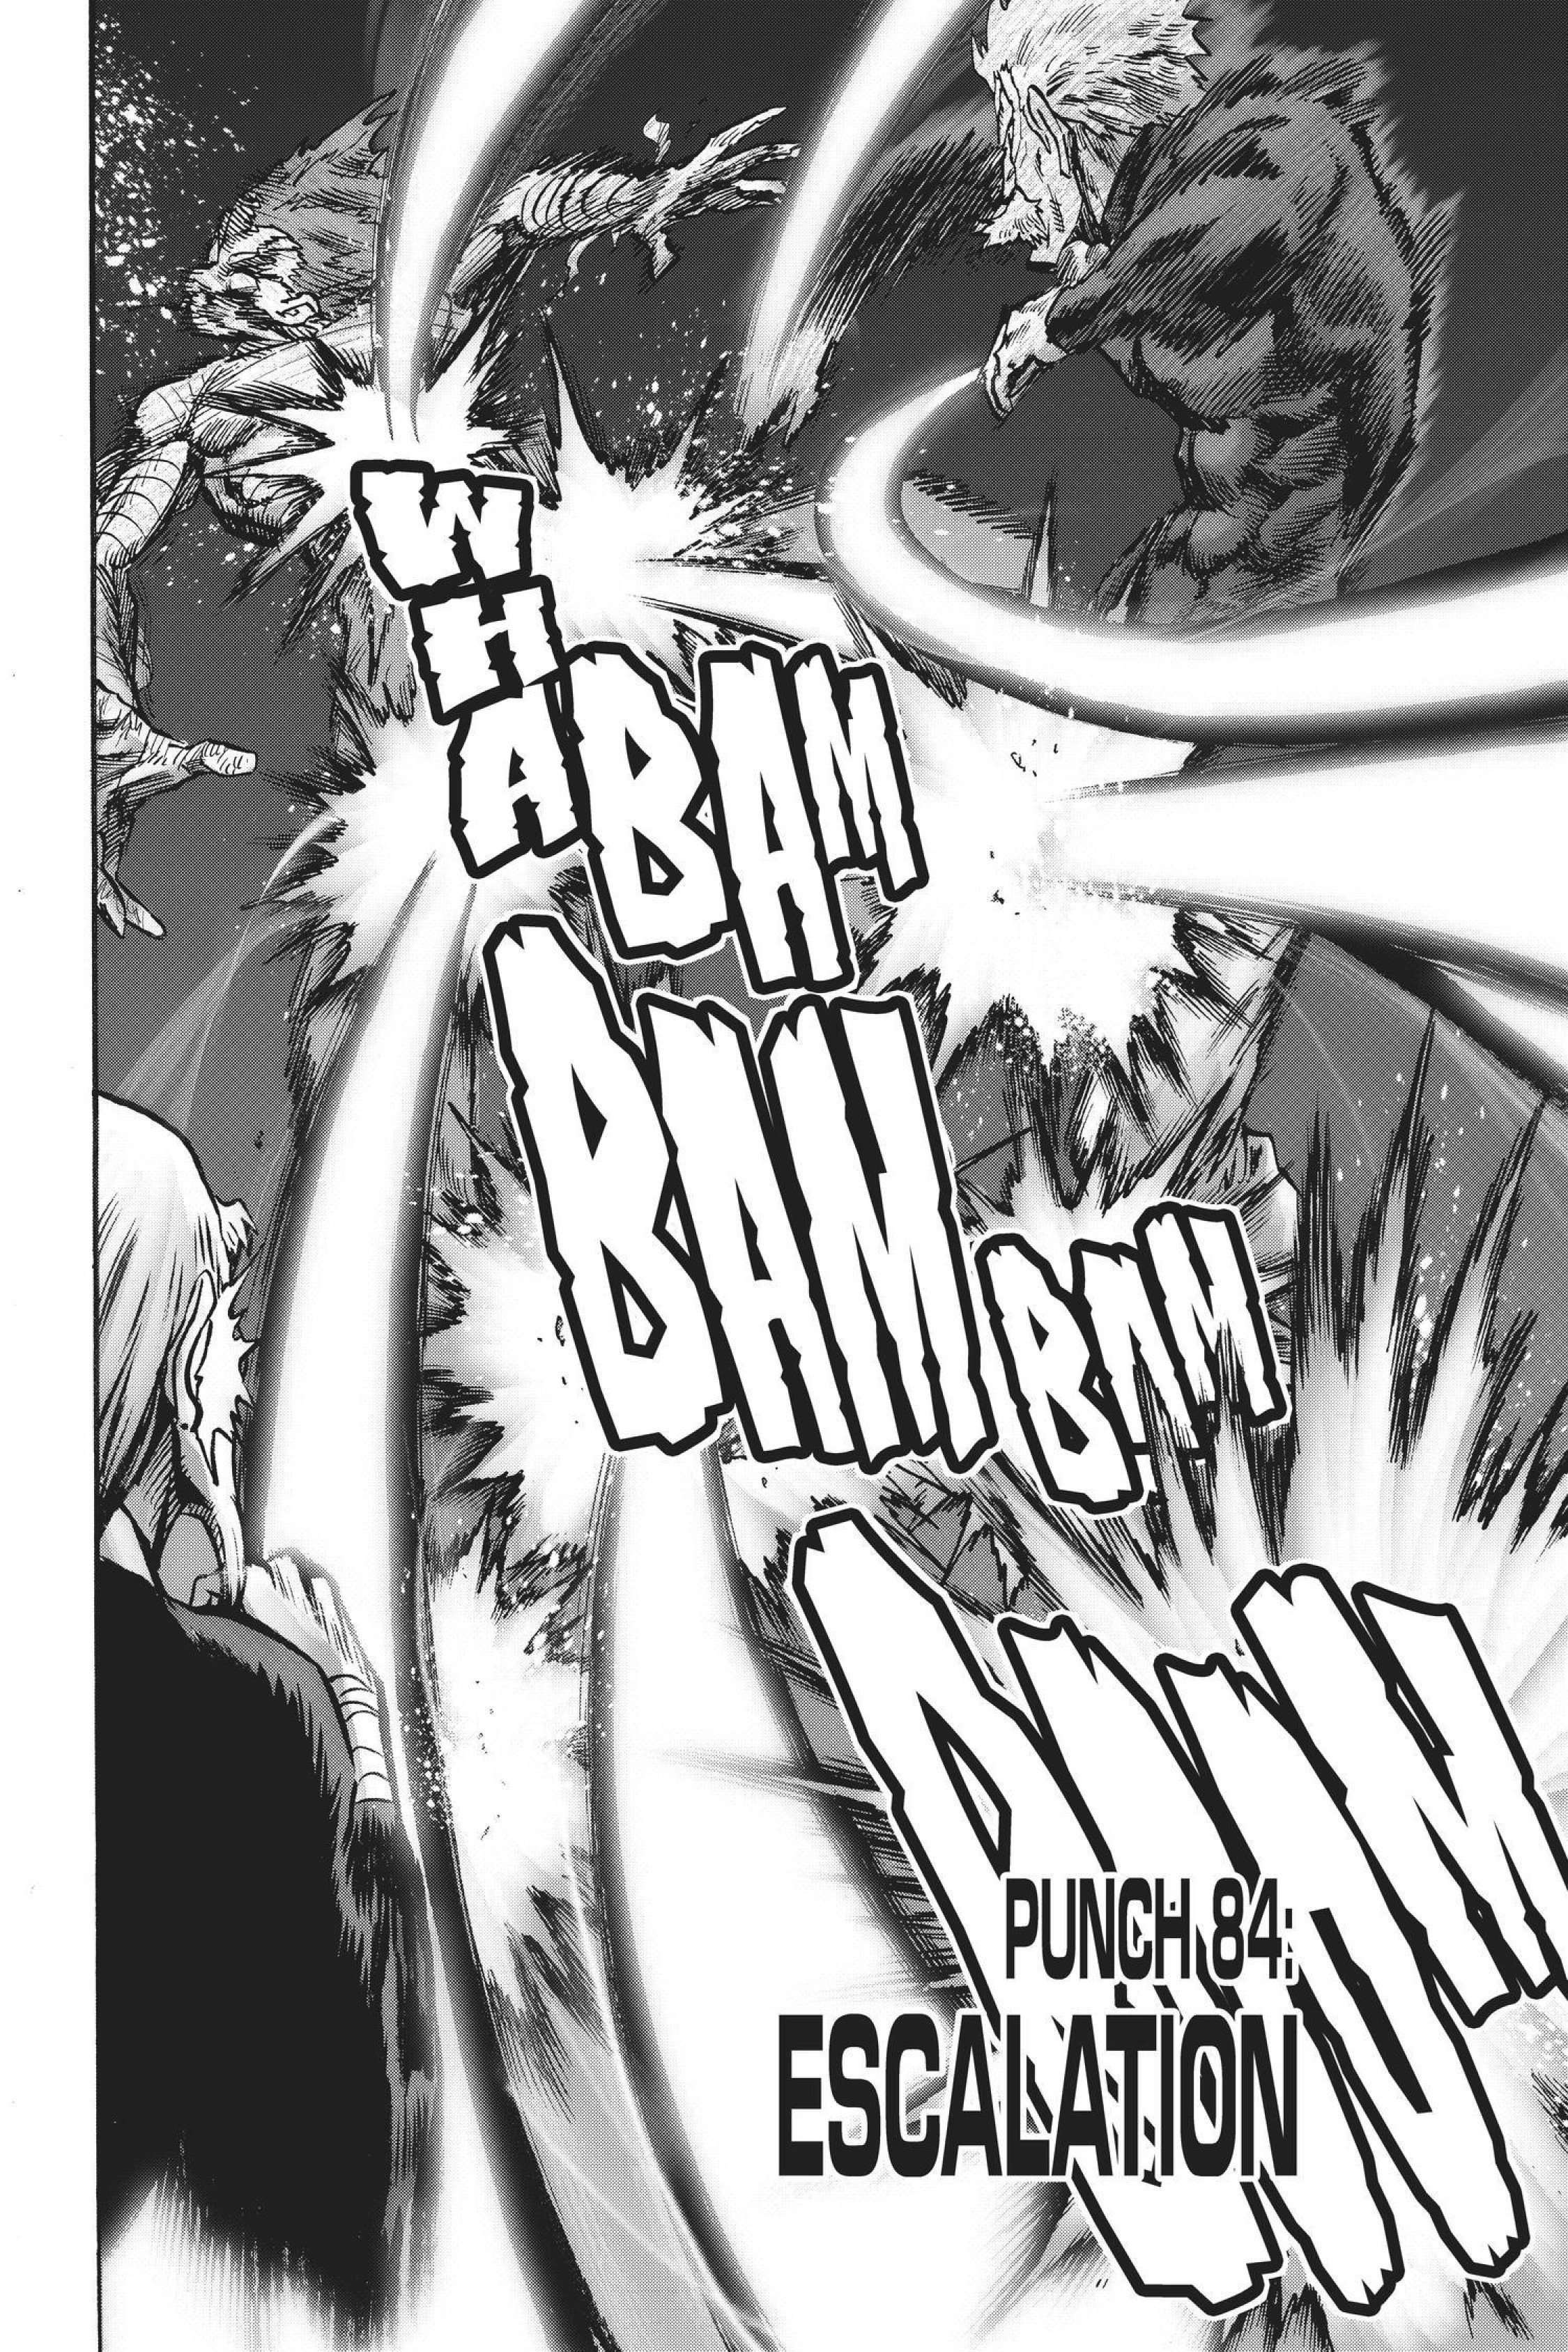 One Punch Man Chapter 84 Chapter 84 | One-Punch Man Wiki | Fandom